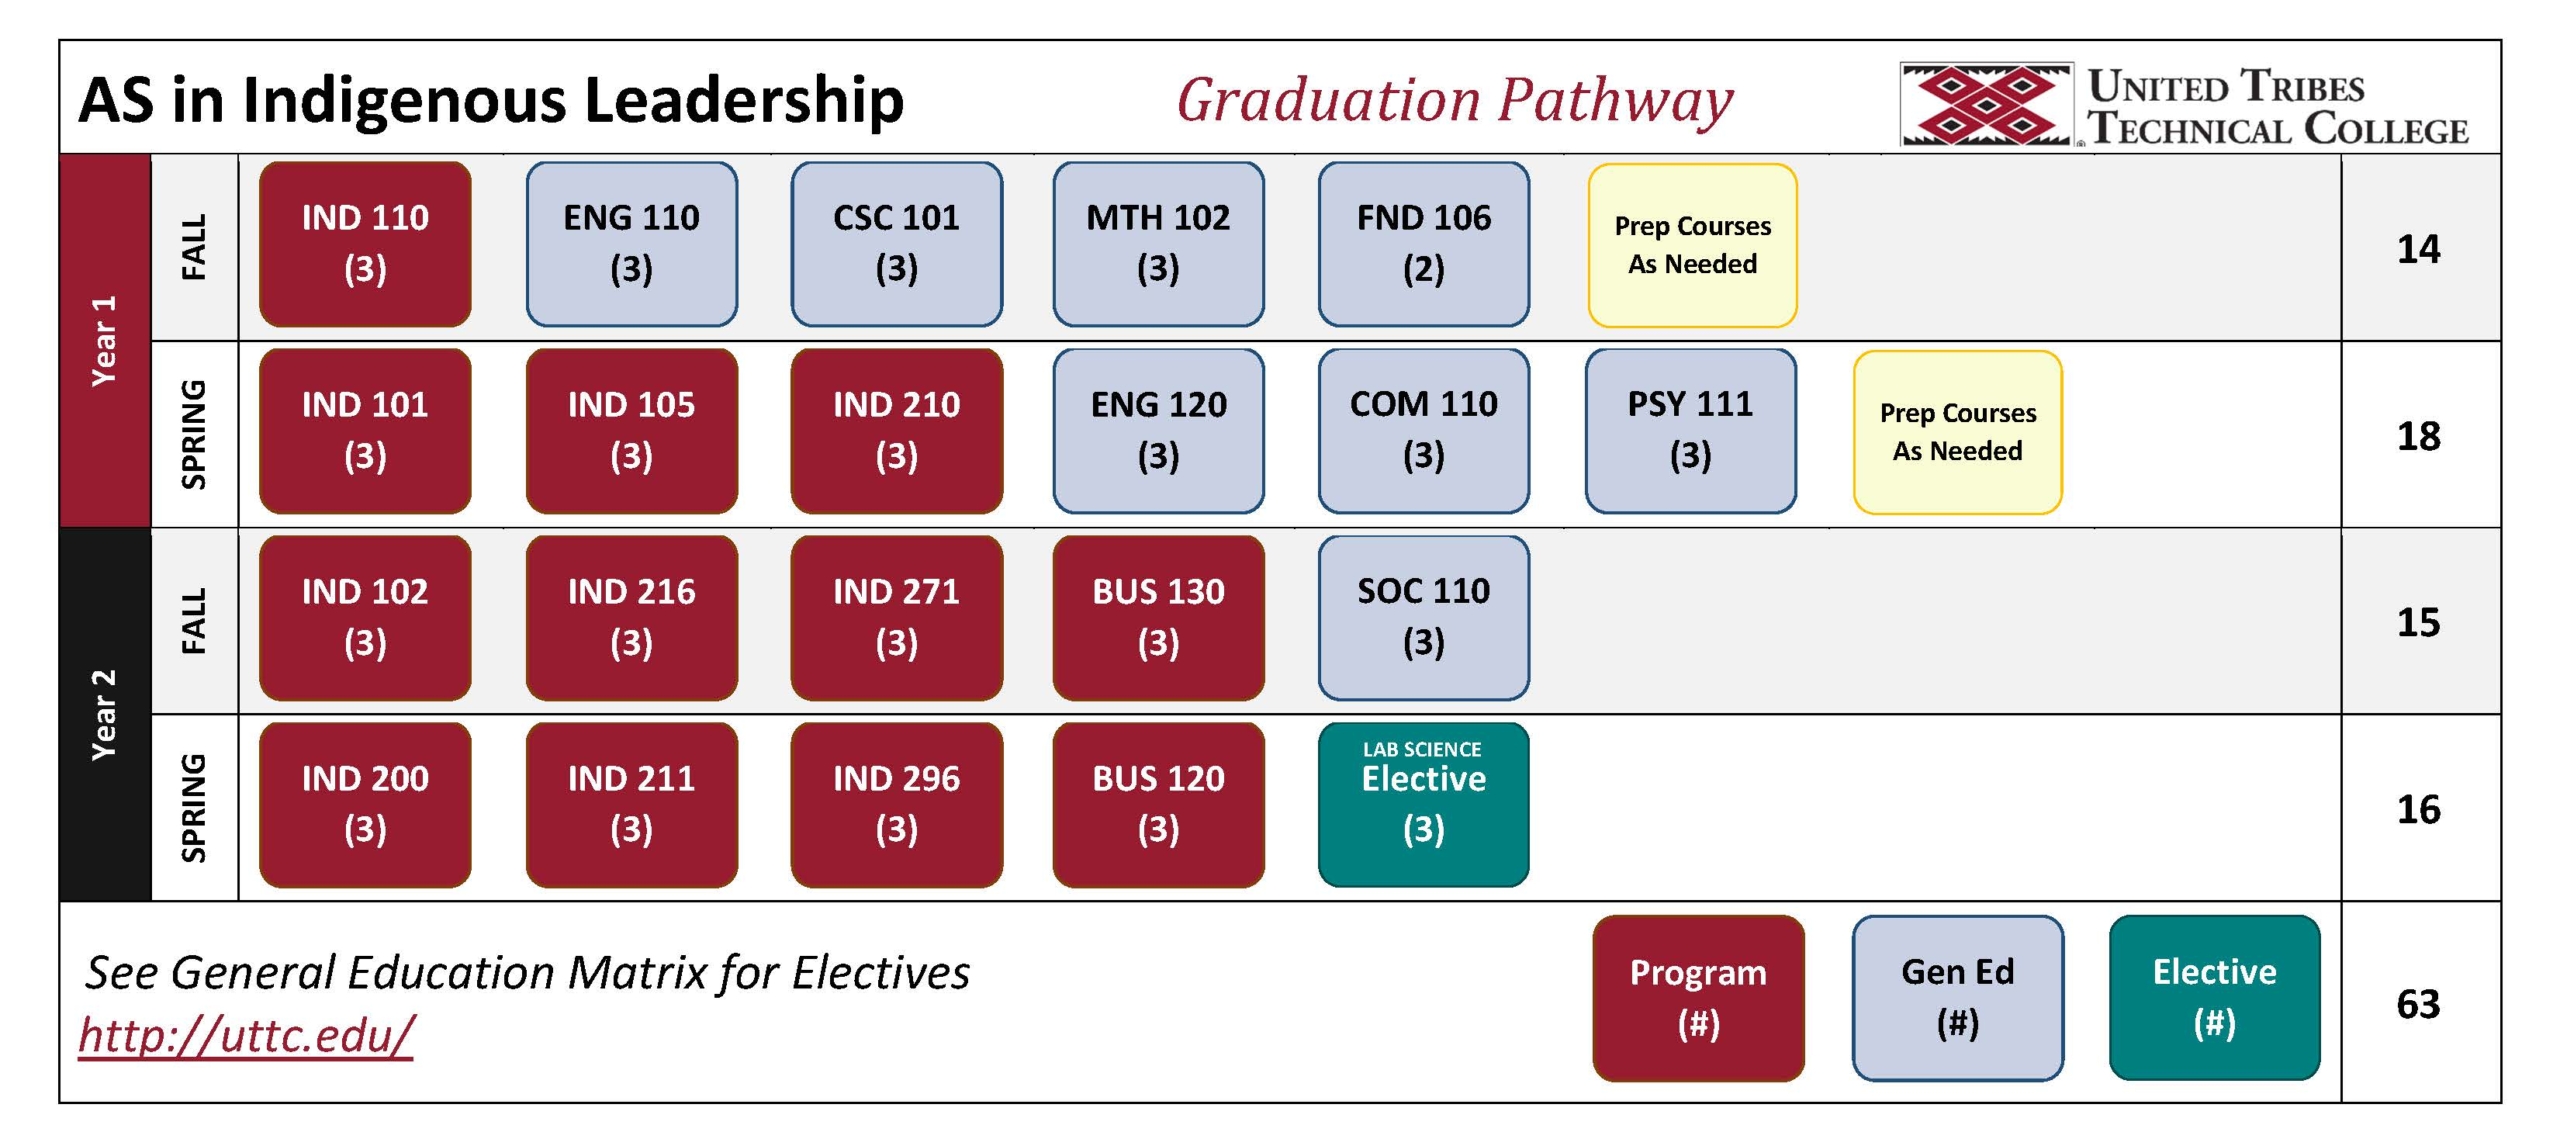 A visual layout of the graduation pathway for the Indigenous Leadership AS Degree.